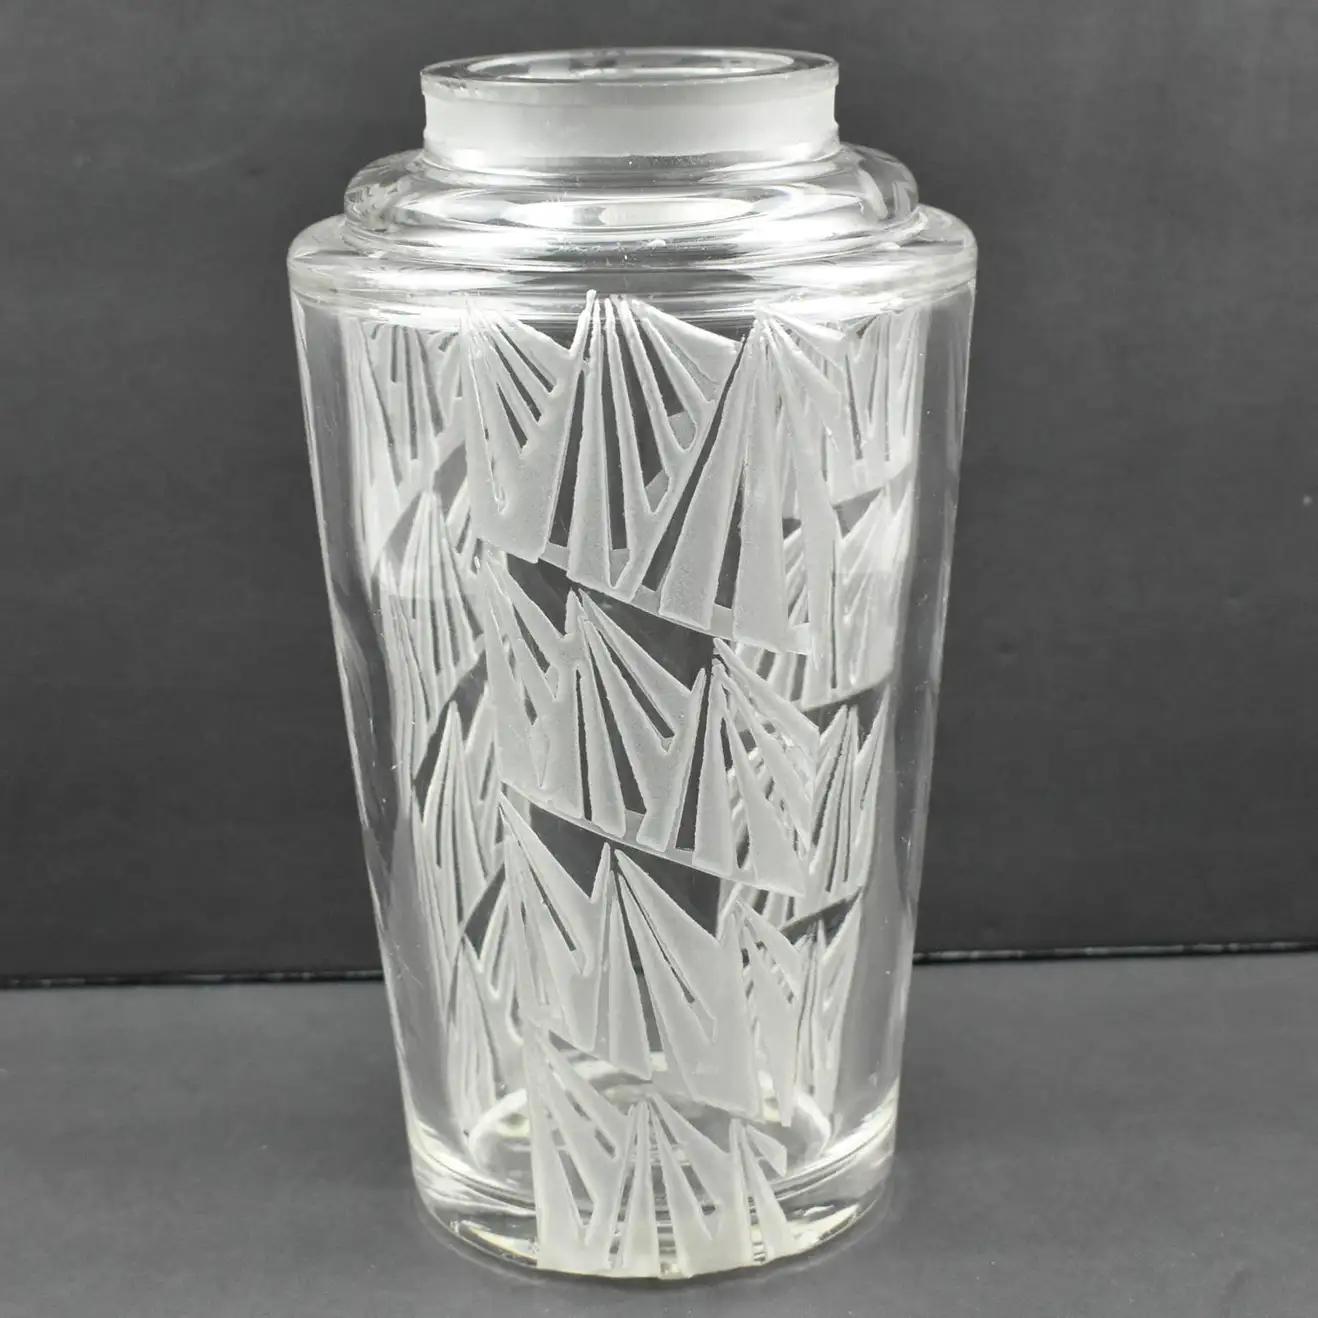 French designer Jean Luce (1895-1964) designed this handsome acid-etched glass vase in the 1930s. The geometric design has repeated decoration all around the vase. The signature is on the underside with the usual Luce monogram. 
The vase is in good